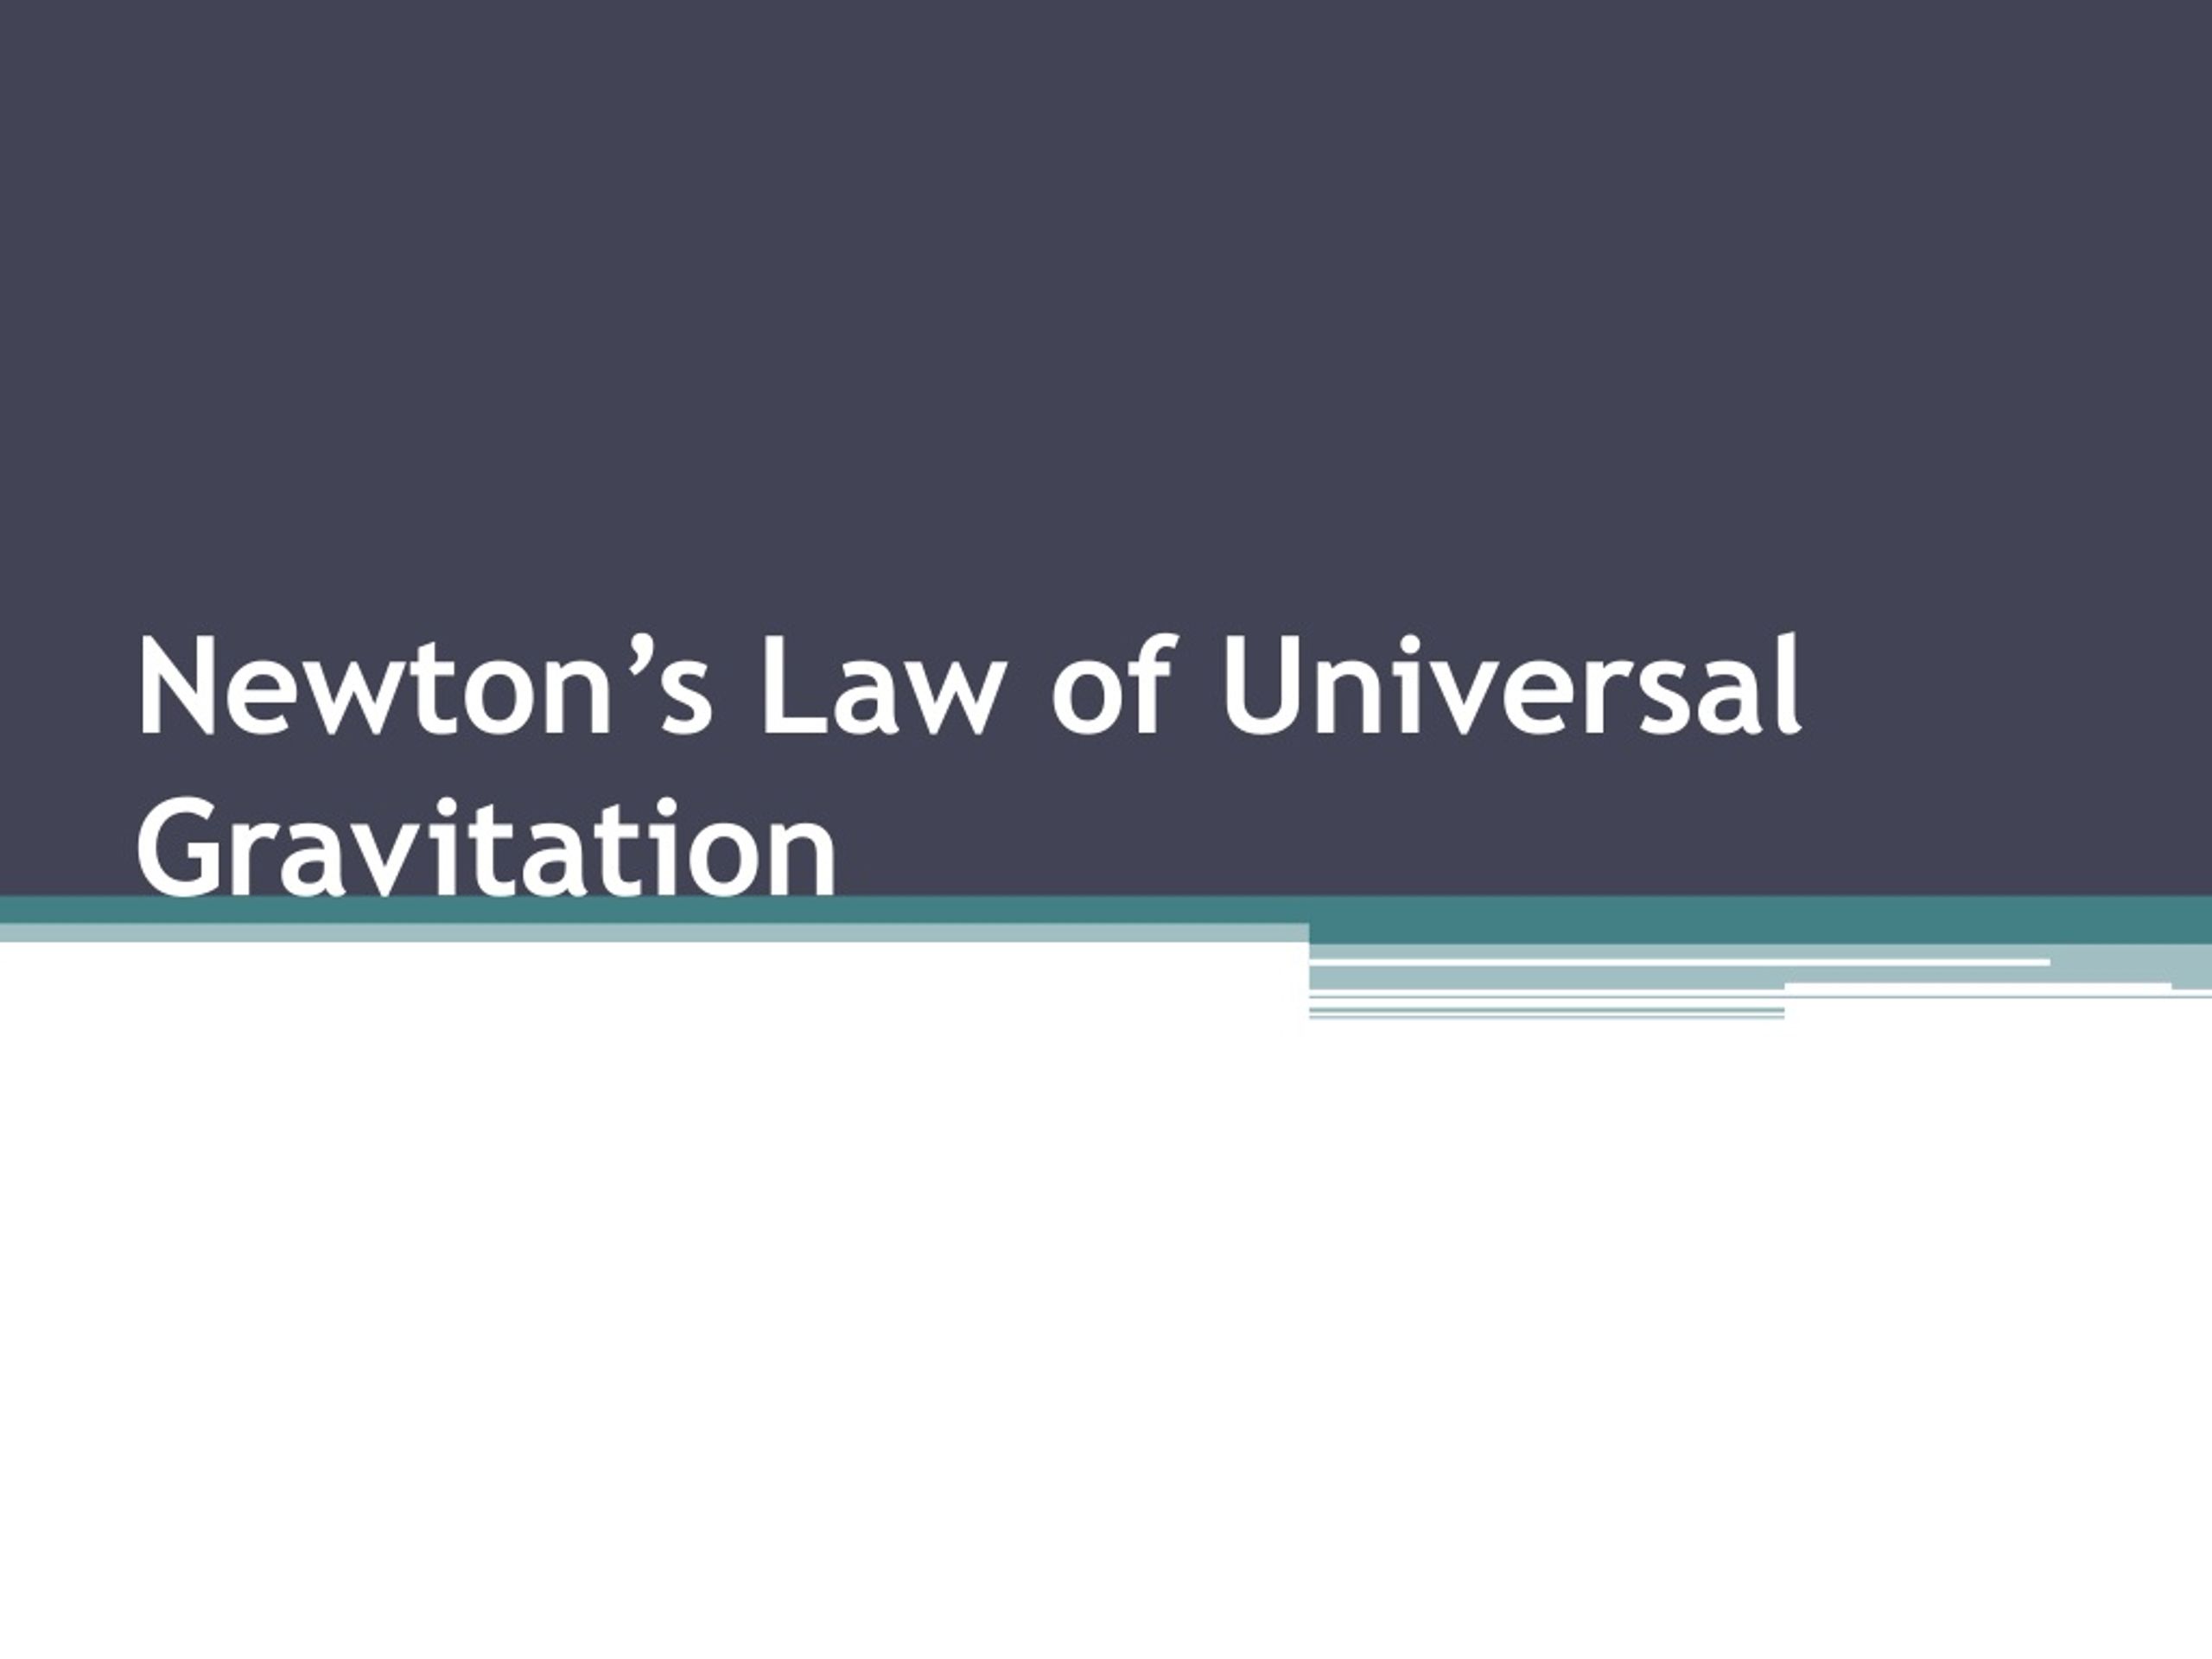 Ppt Newtons Law Of Universal Gravitation Powerpoint Presentation Free Download Id358165 8852